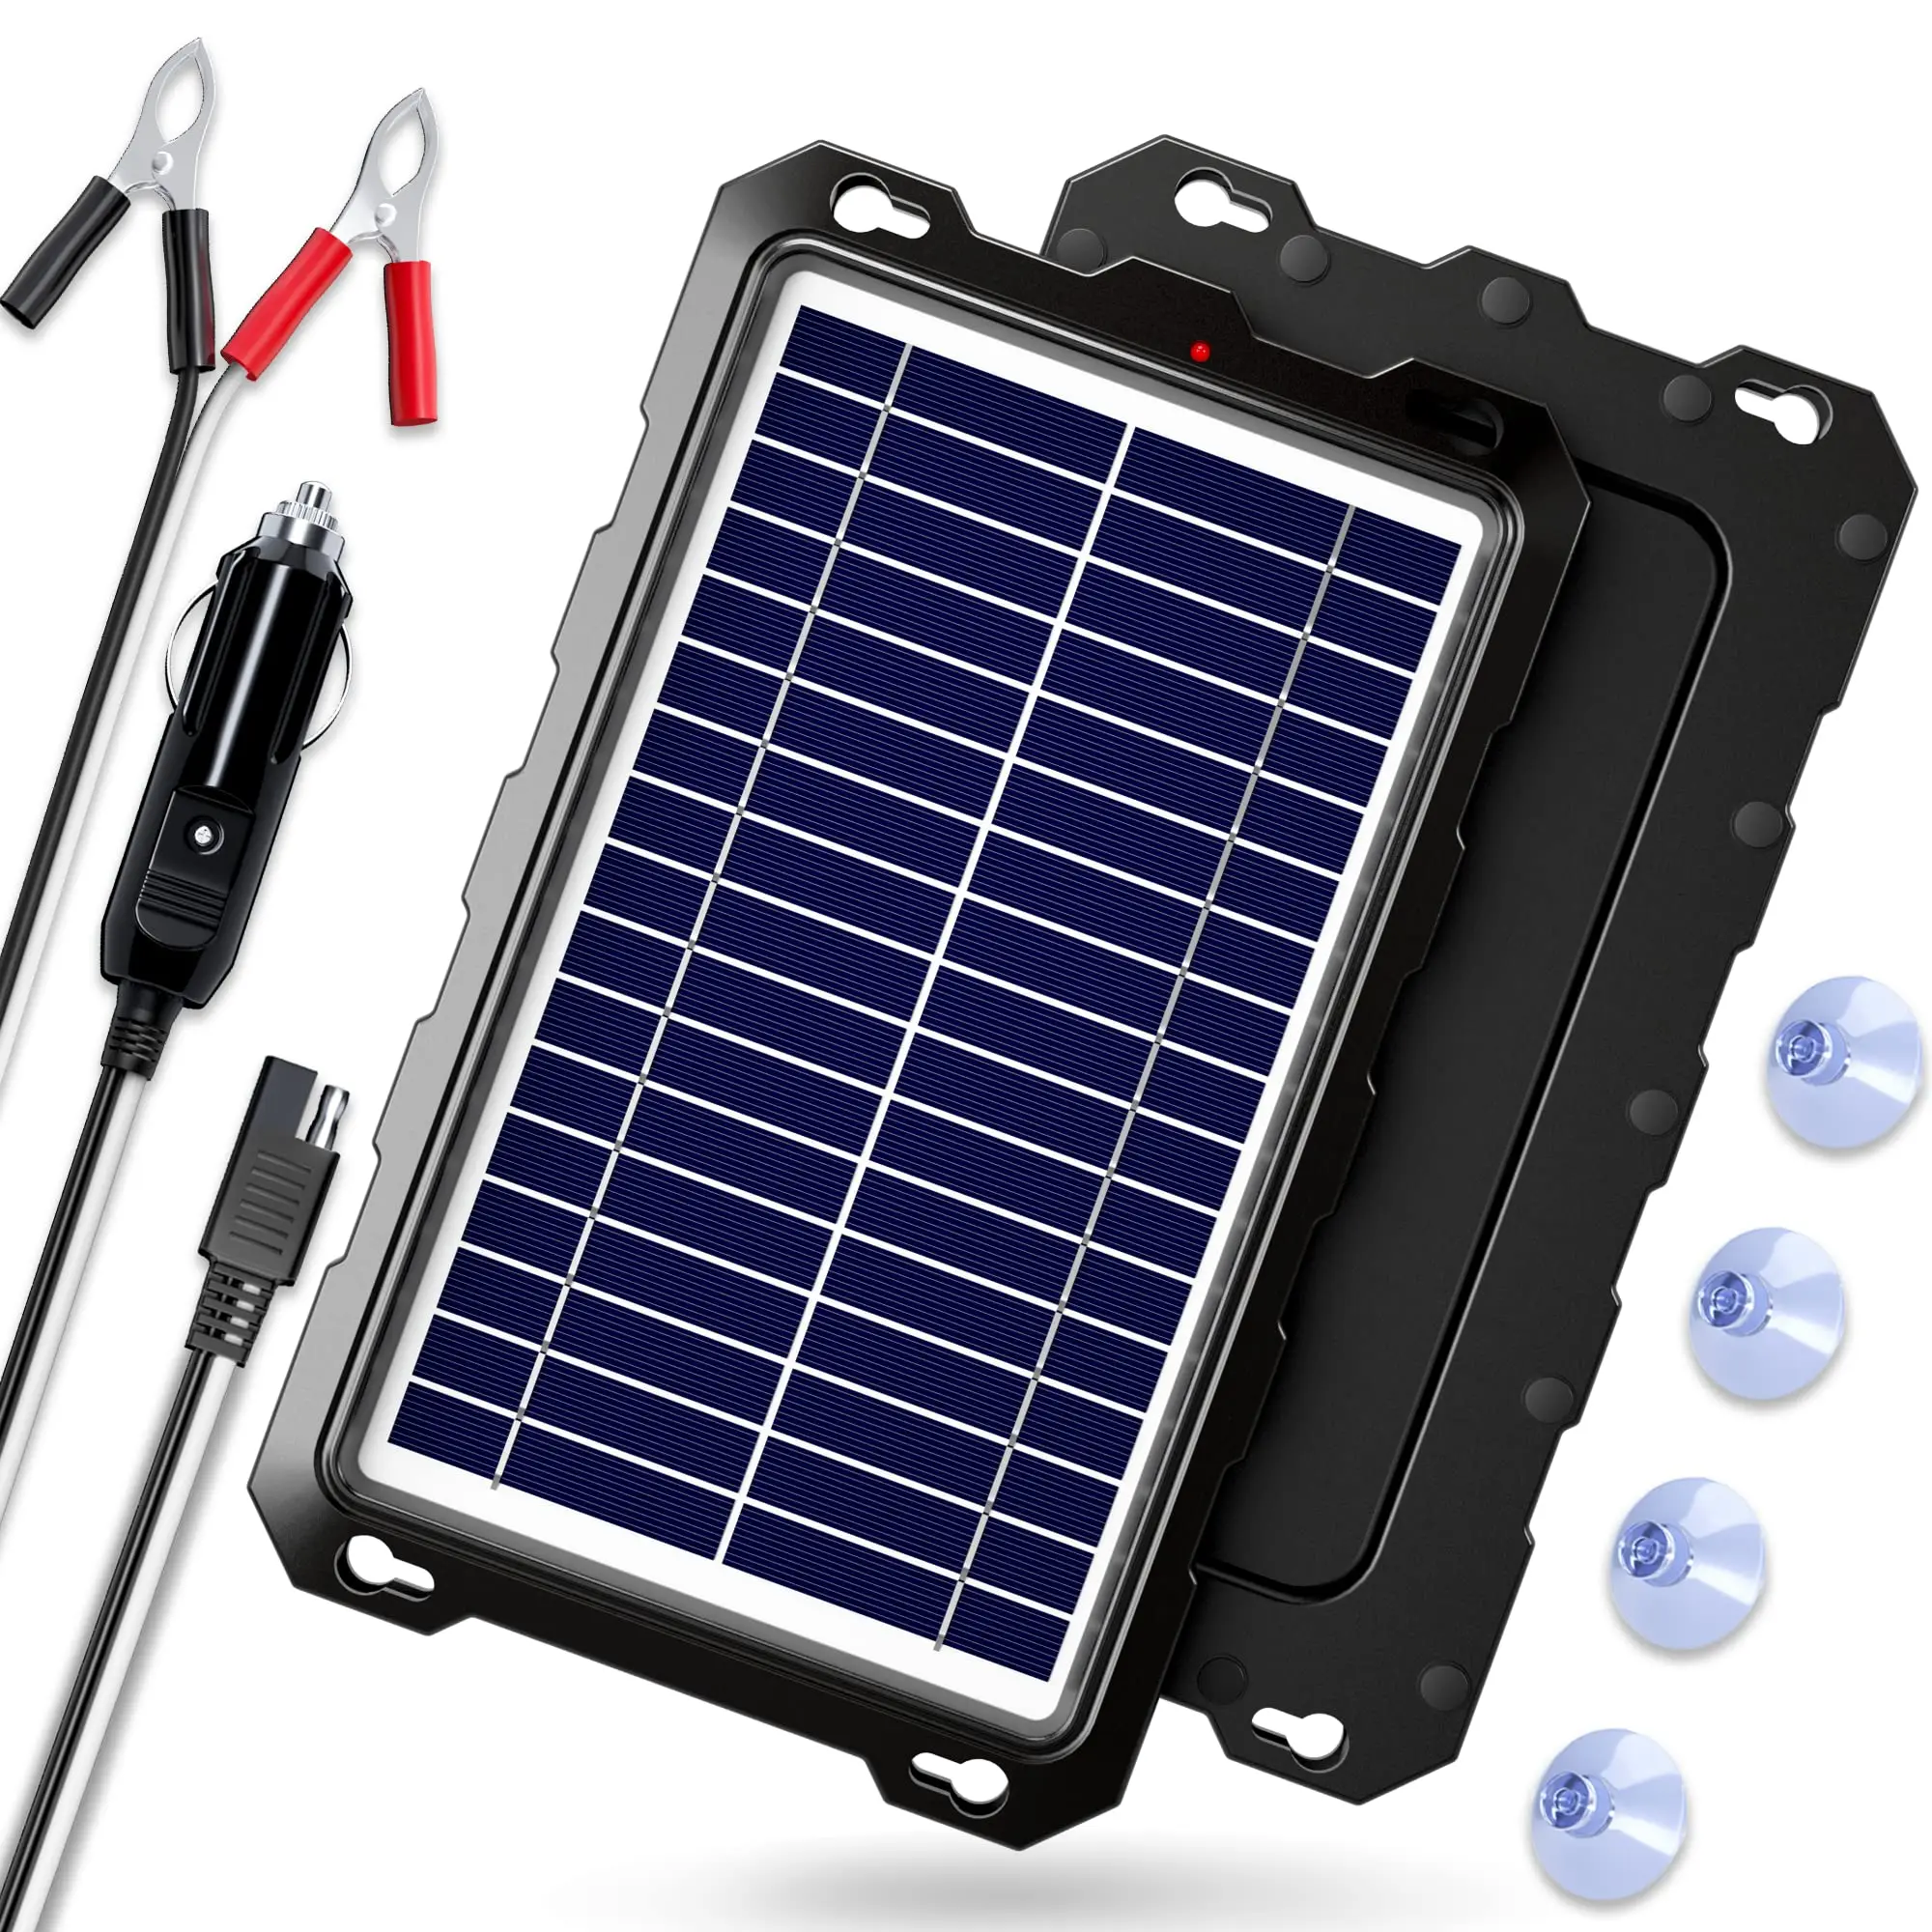 12v solar panel charger - Will a 100 watt solar panel charge a 12-volt battery